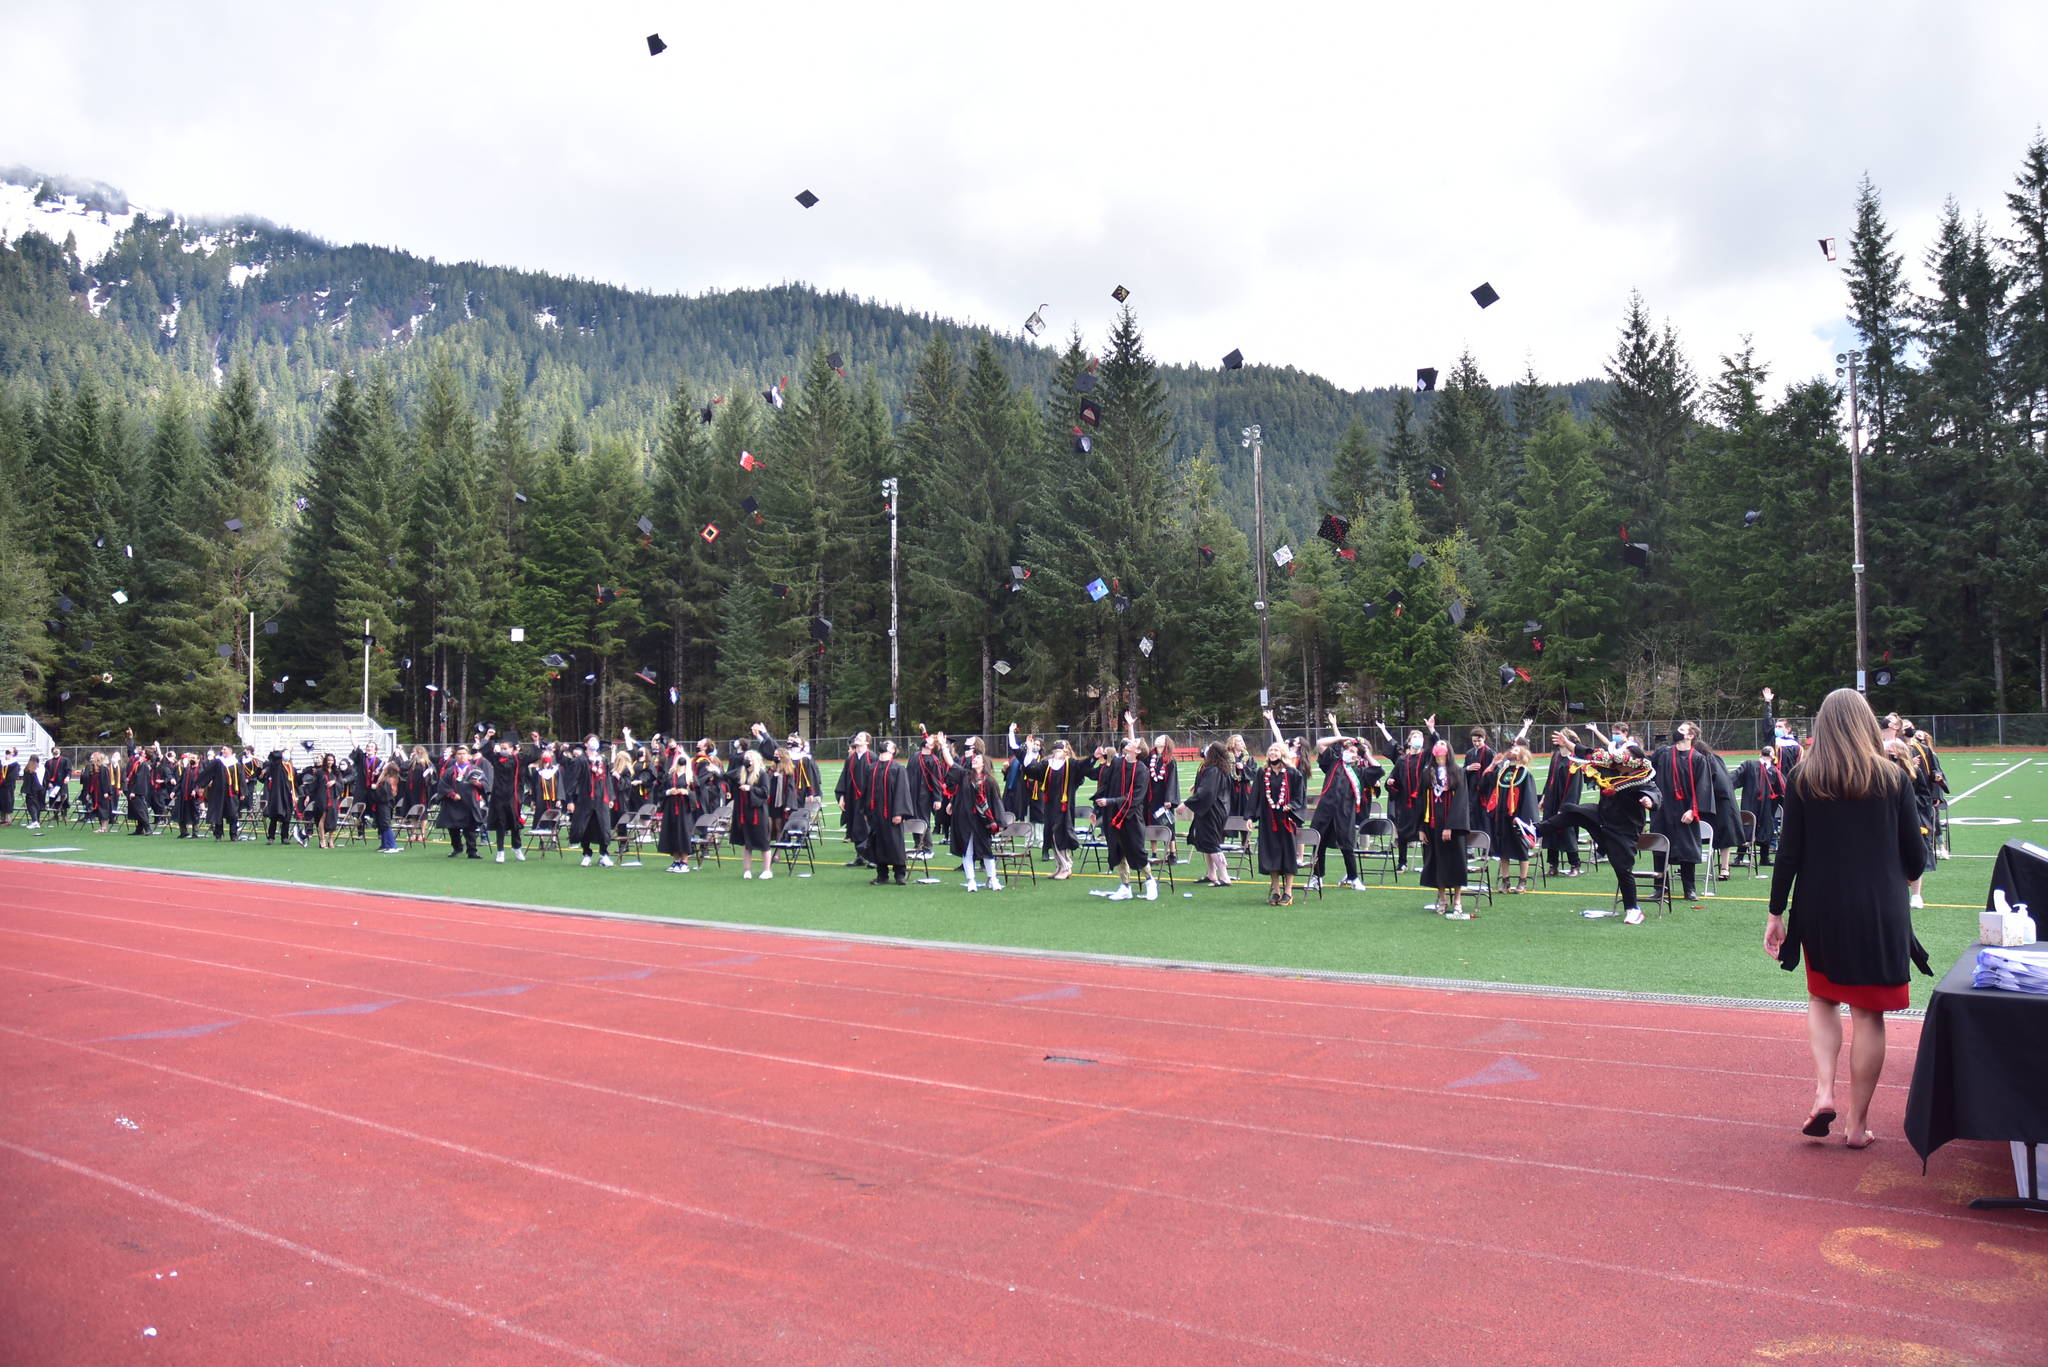 Juneau-Douglas High School:Yadaa.at Kalé Class of 2021 students throw their caps in celebration during the graduation ceremony at Adair Kennedy Memorial Park on Sunday, May 23, 2021. (Peter Segall / Juneau Empire)